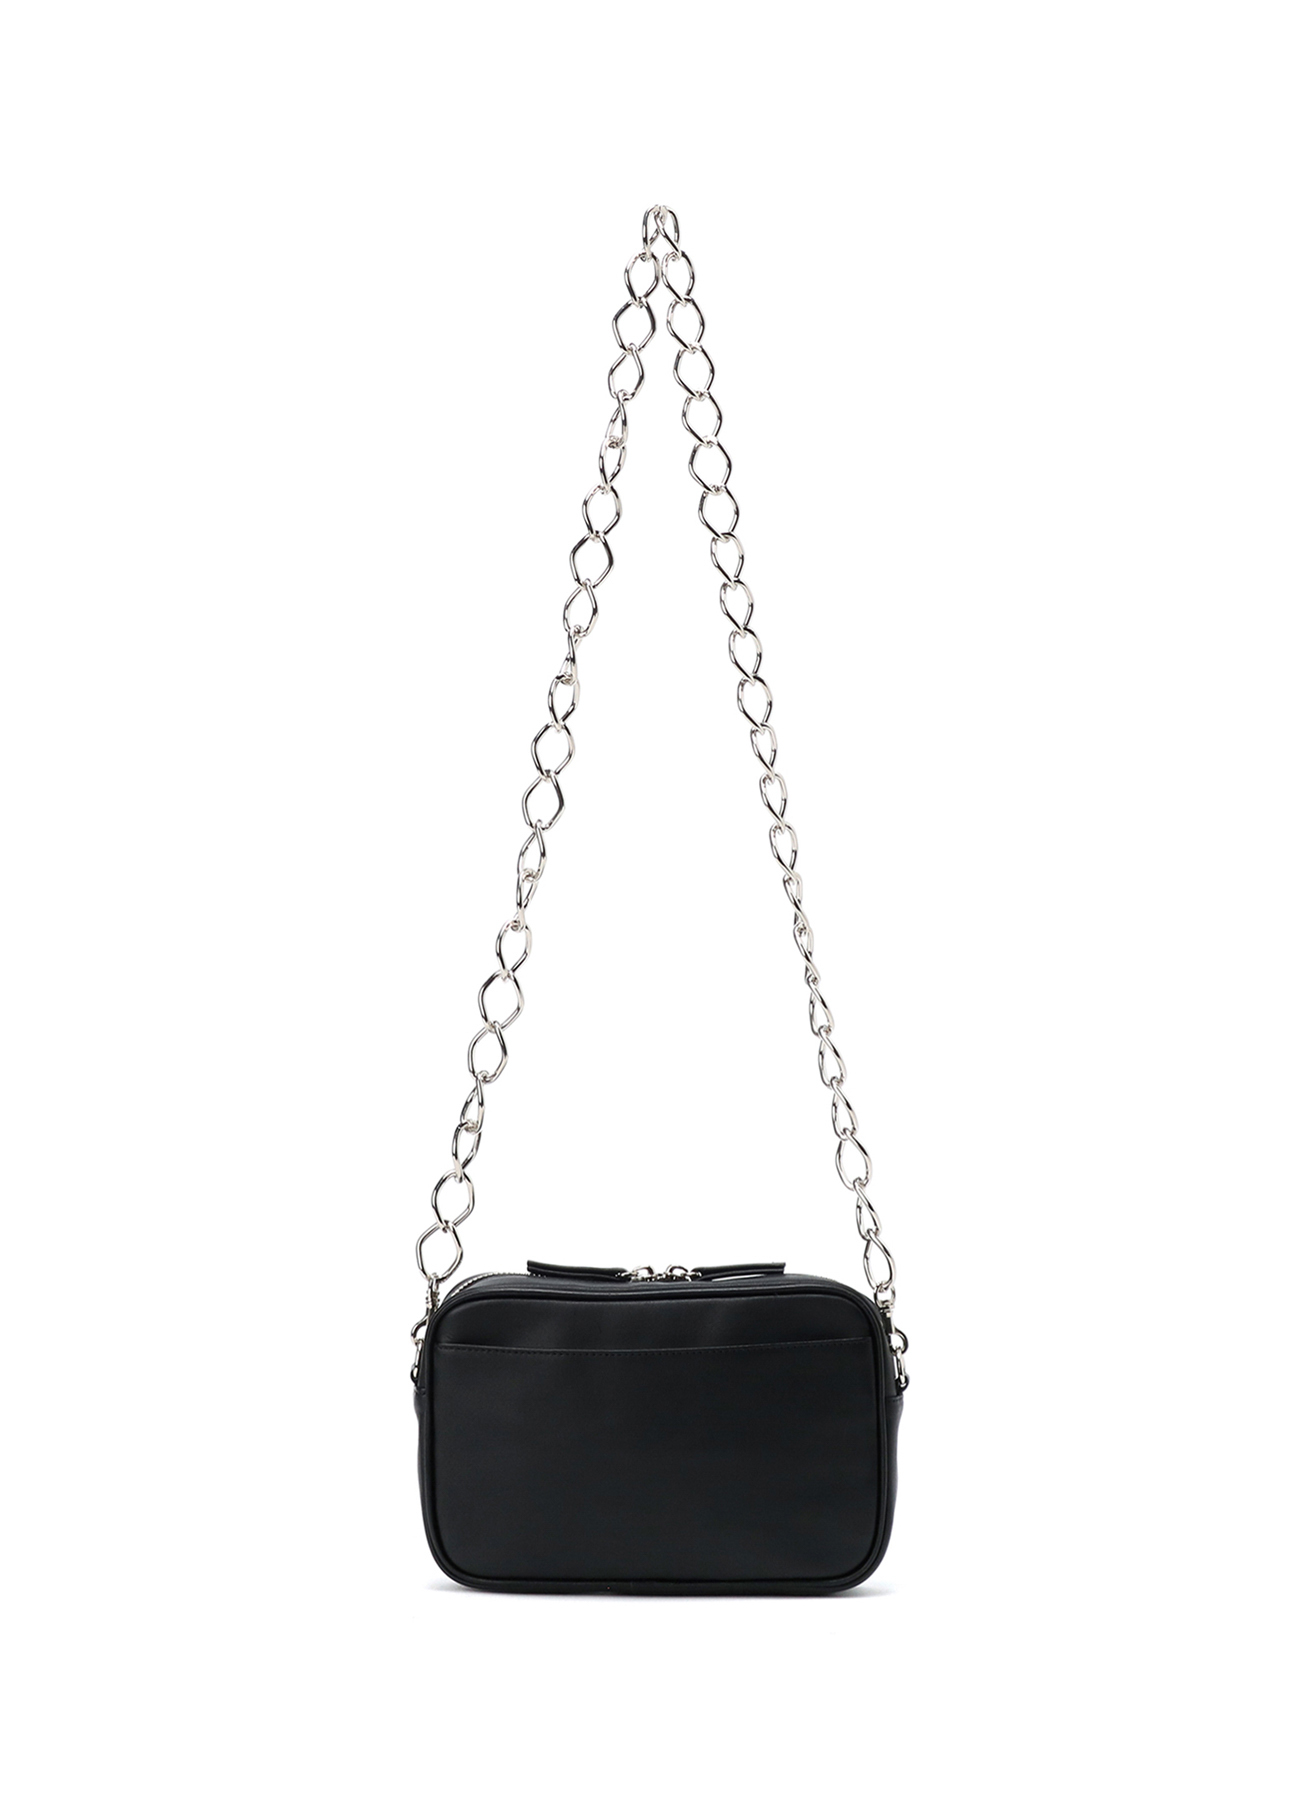 GRAINY LEATHER CHAIN BODY BAG